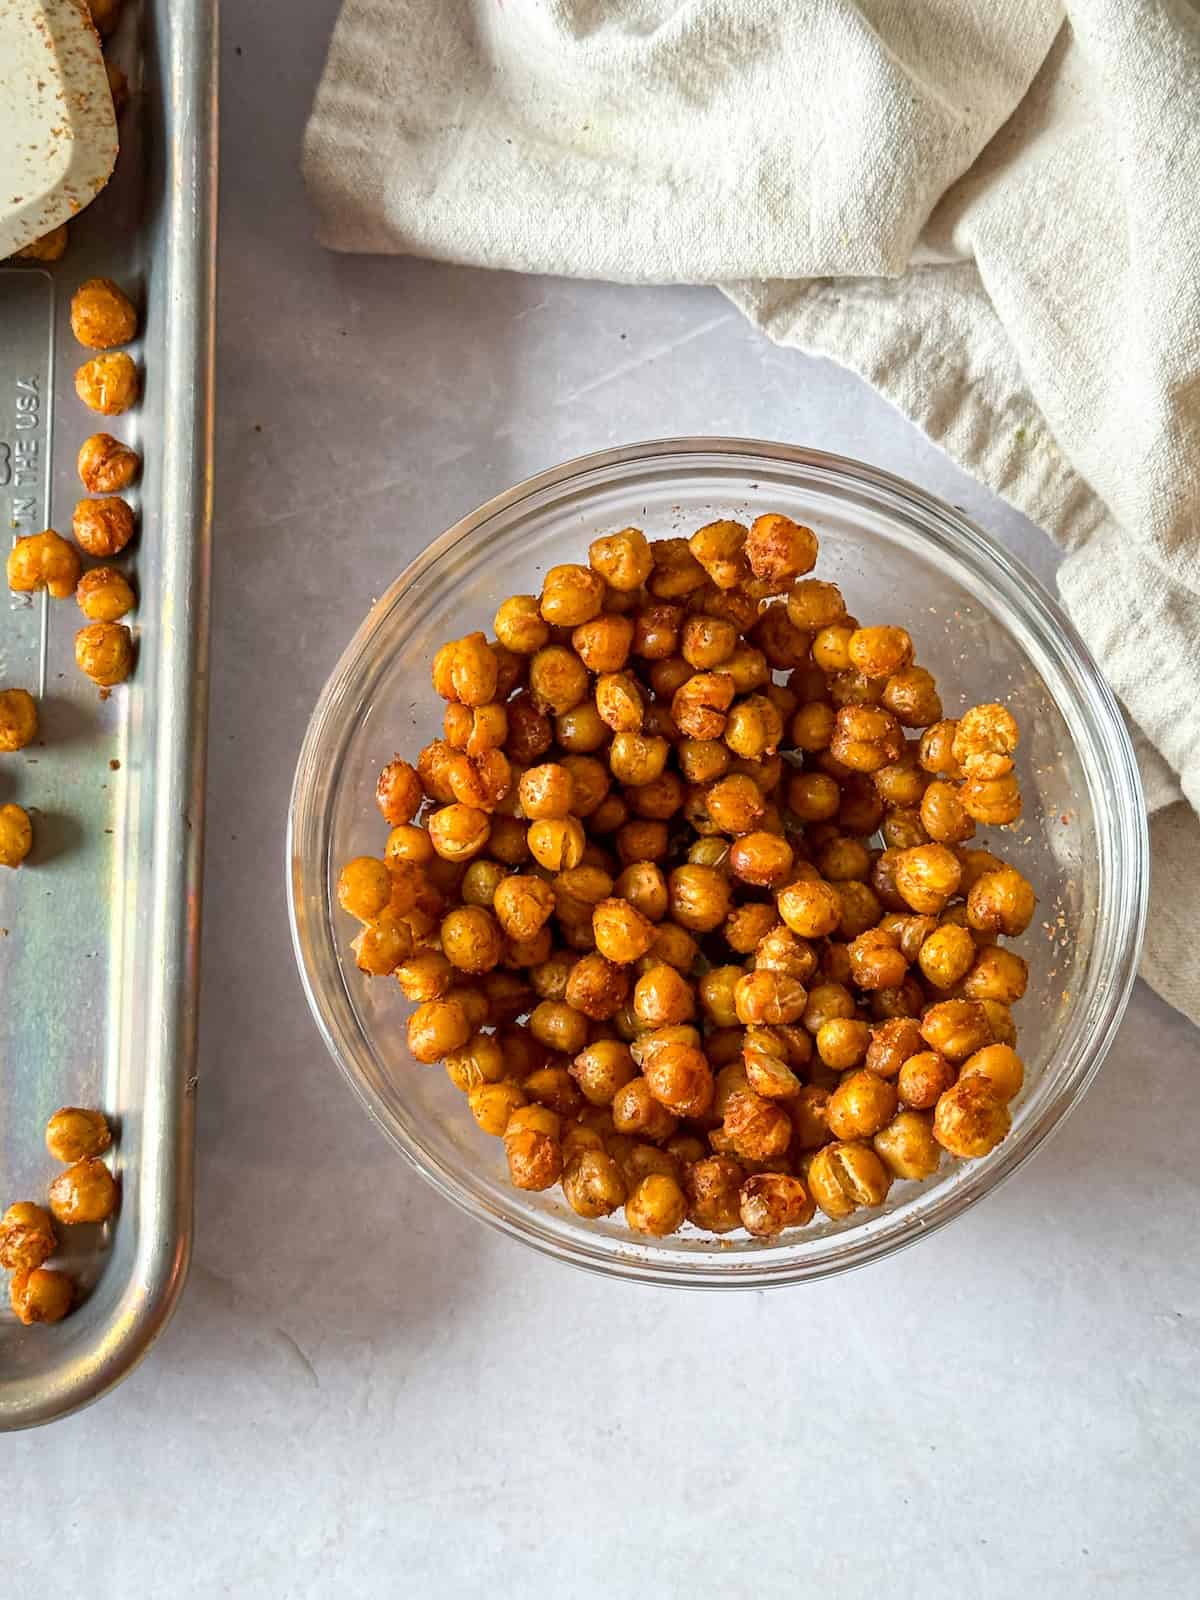 Mediterranean roasted chickpeas on a baking sheet and in a glass bowl.